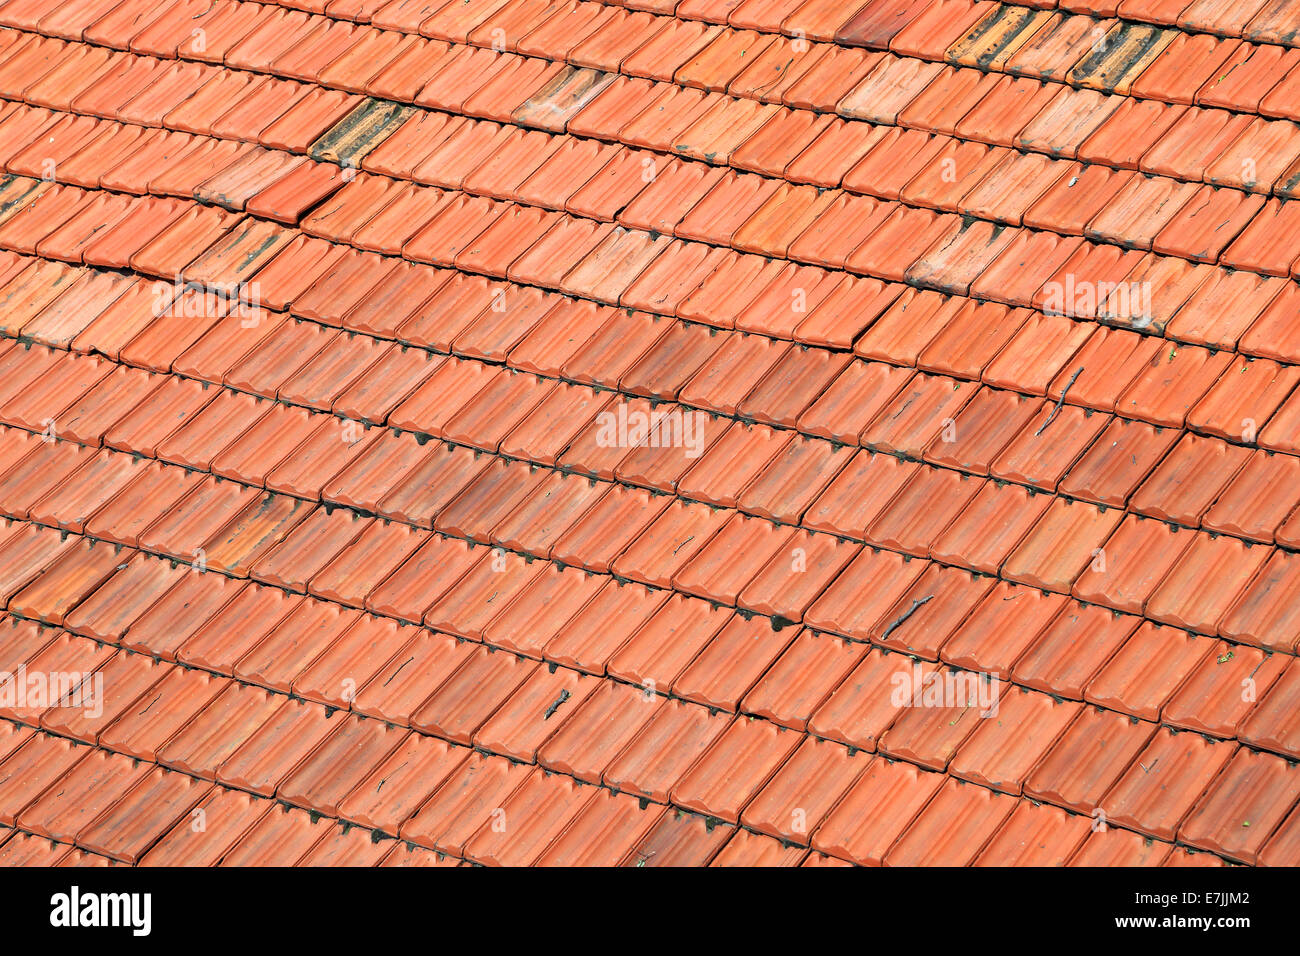 Red Roof Tile Texture Foto Stock